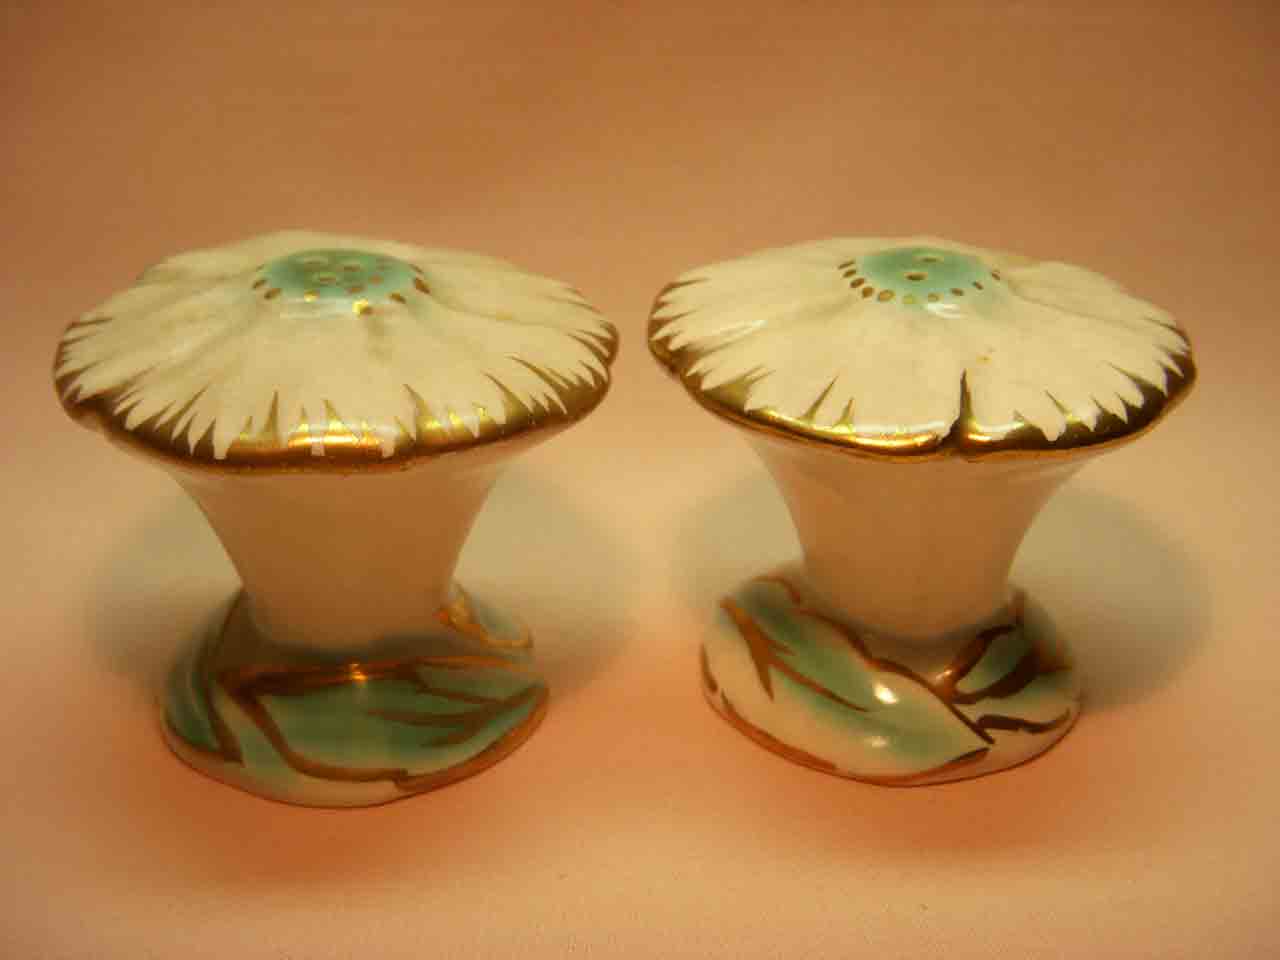 Vallona Starr cosmos salt and pepper shakers